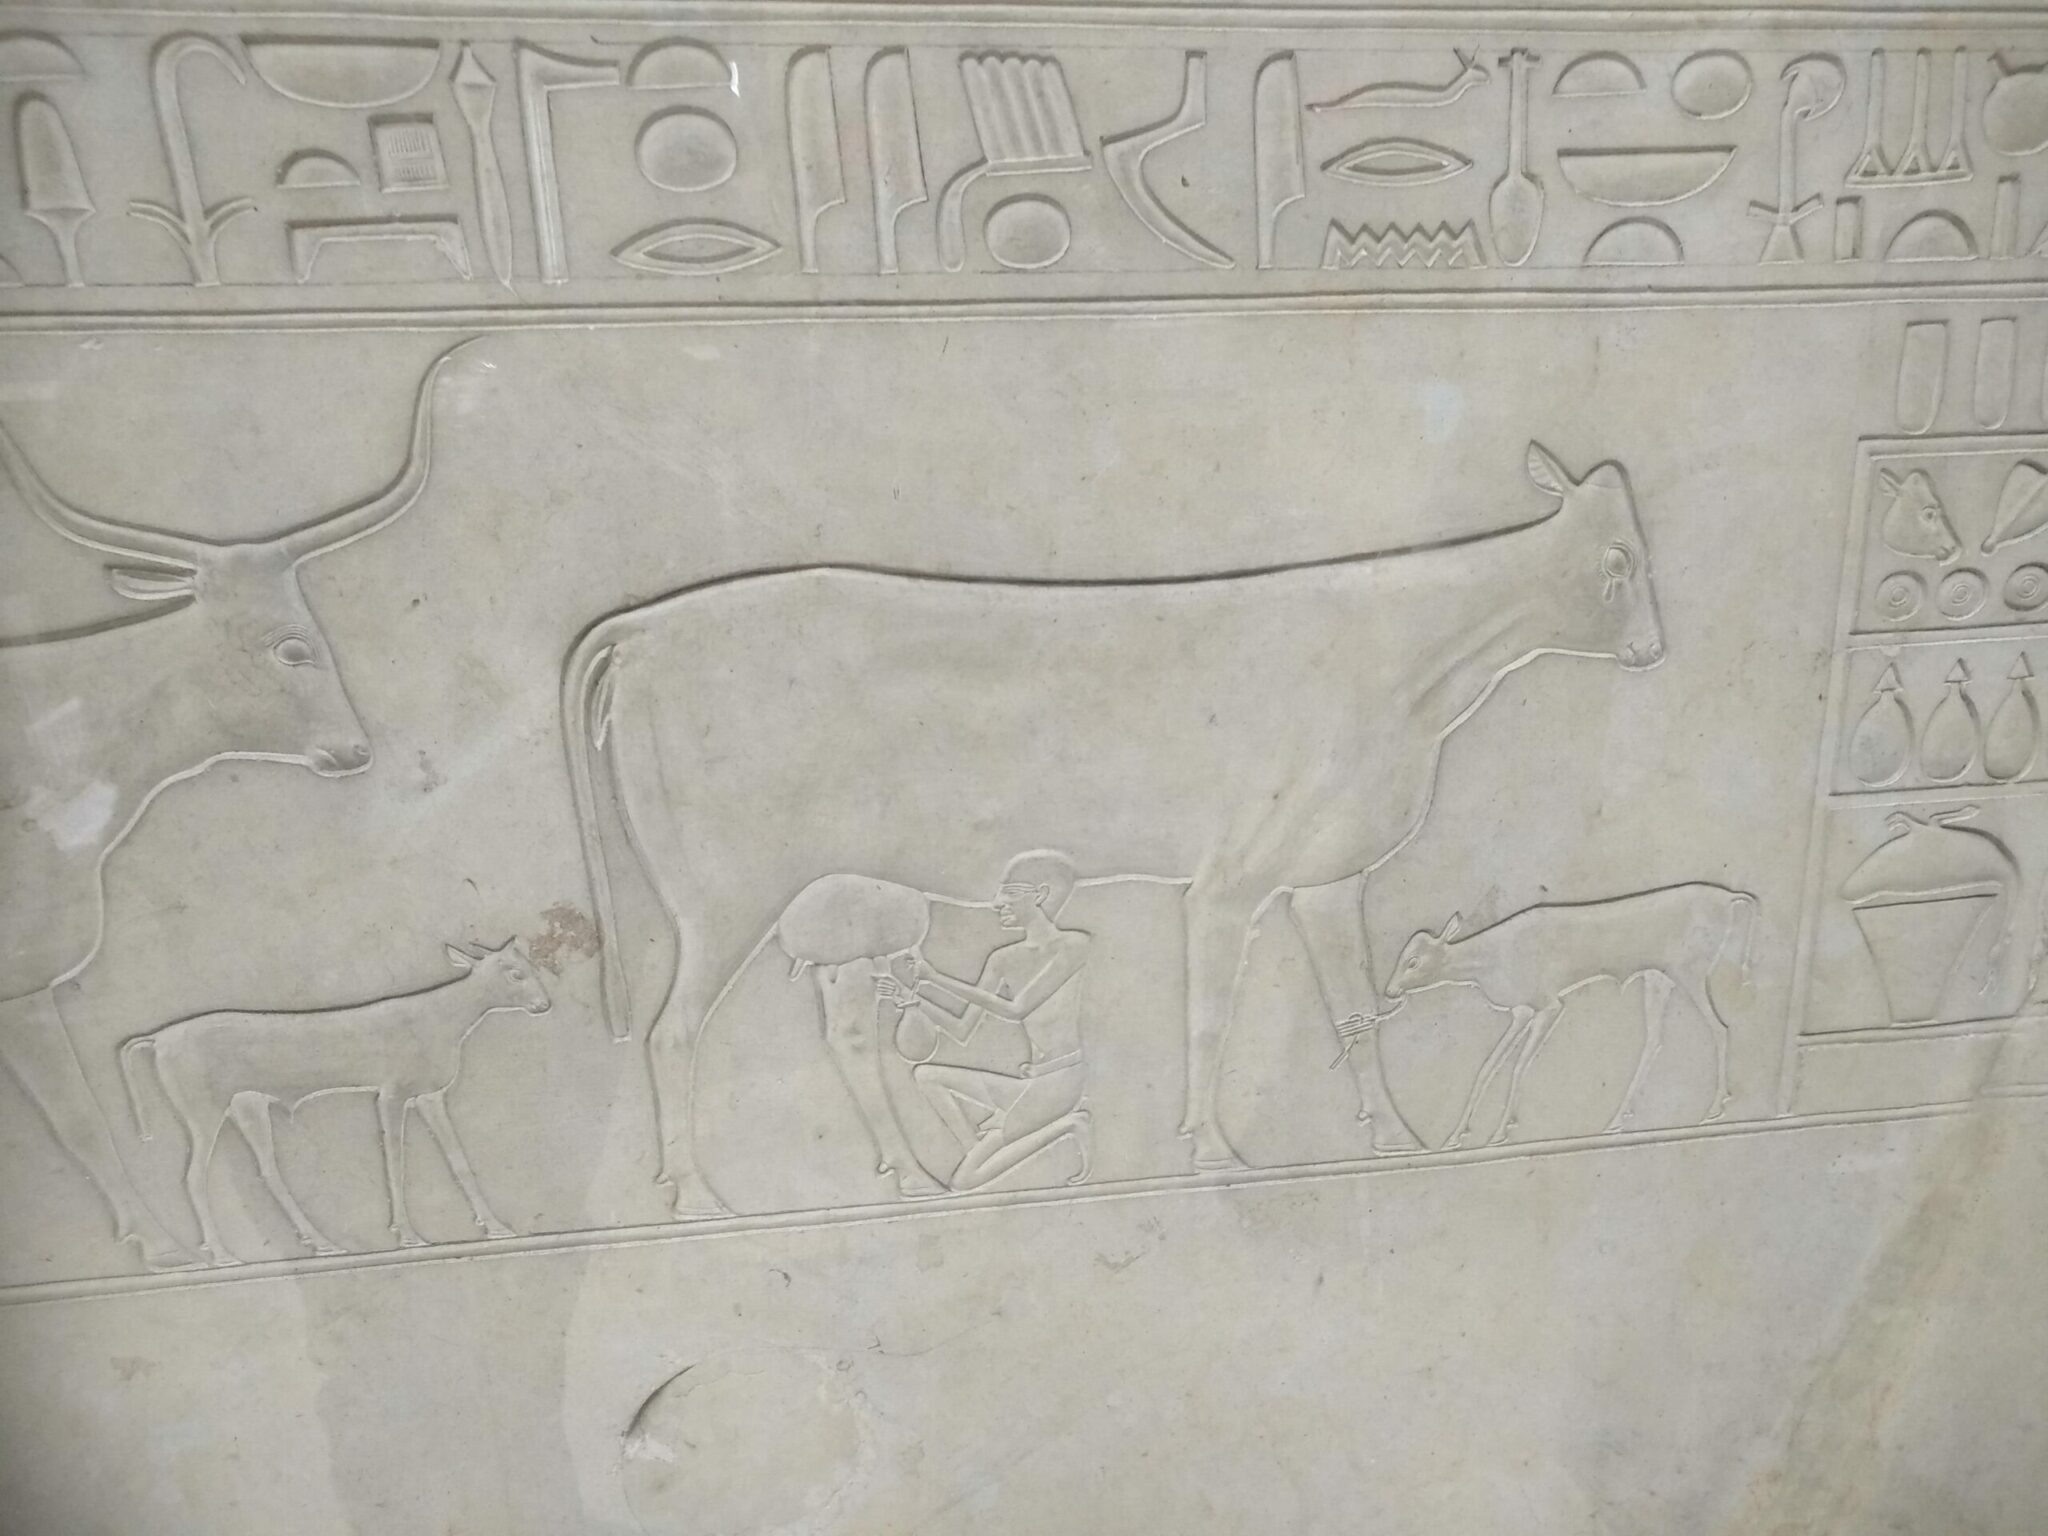 how did a cow in egypt become a mummy scaled